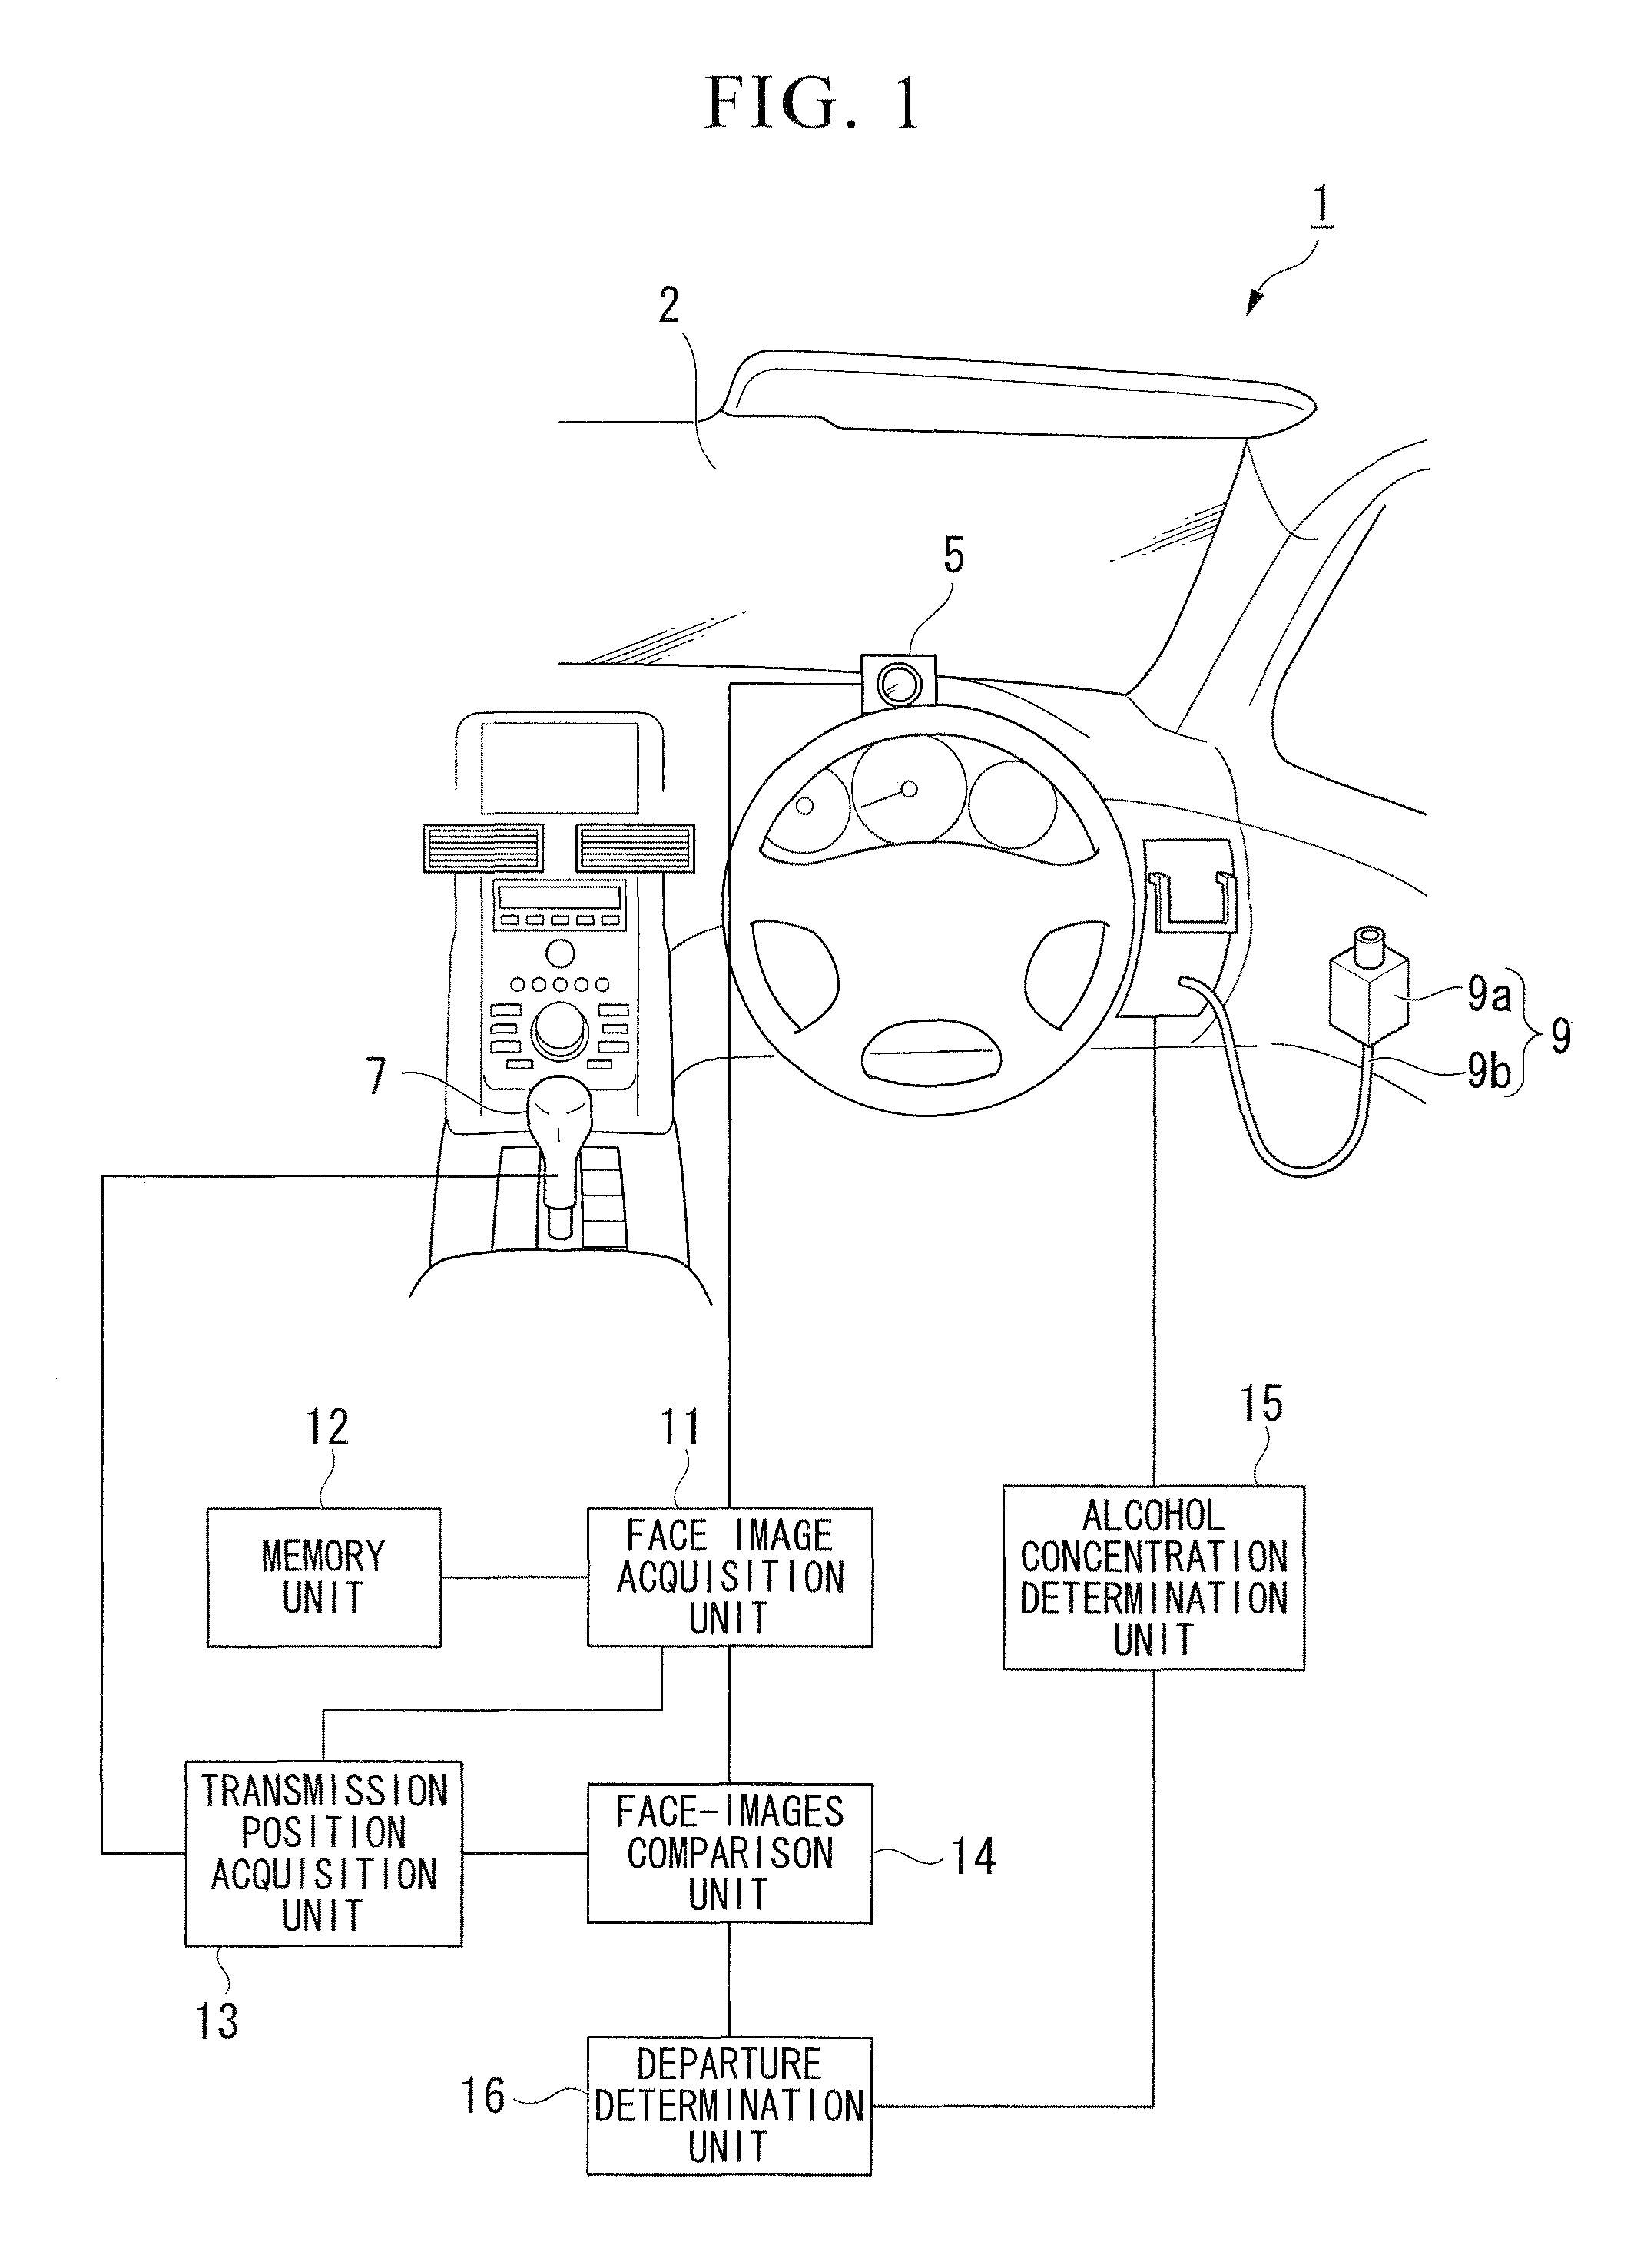 Anti-drunk driving apparatus for vehicle